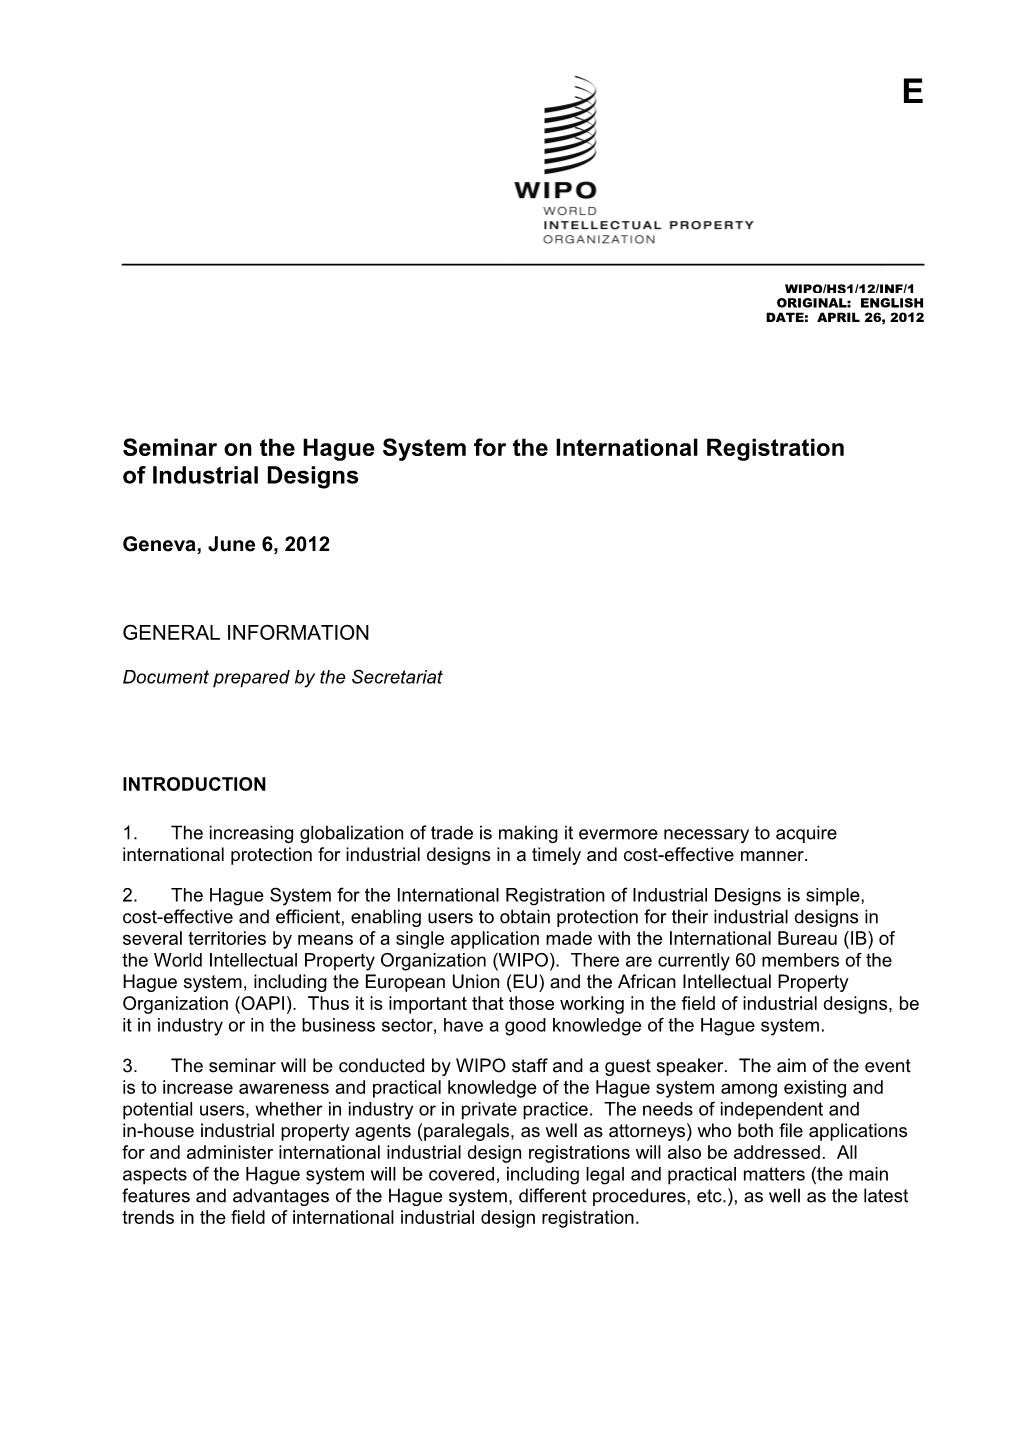 Seminar on the Hague System for the International Registration of Industrial Designs s1